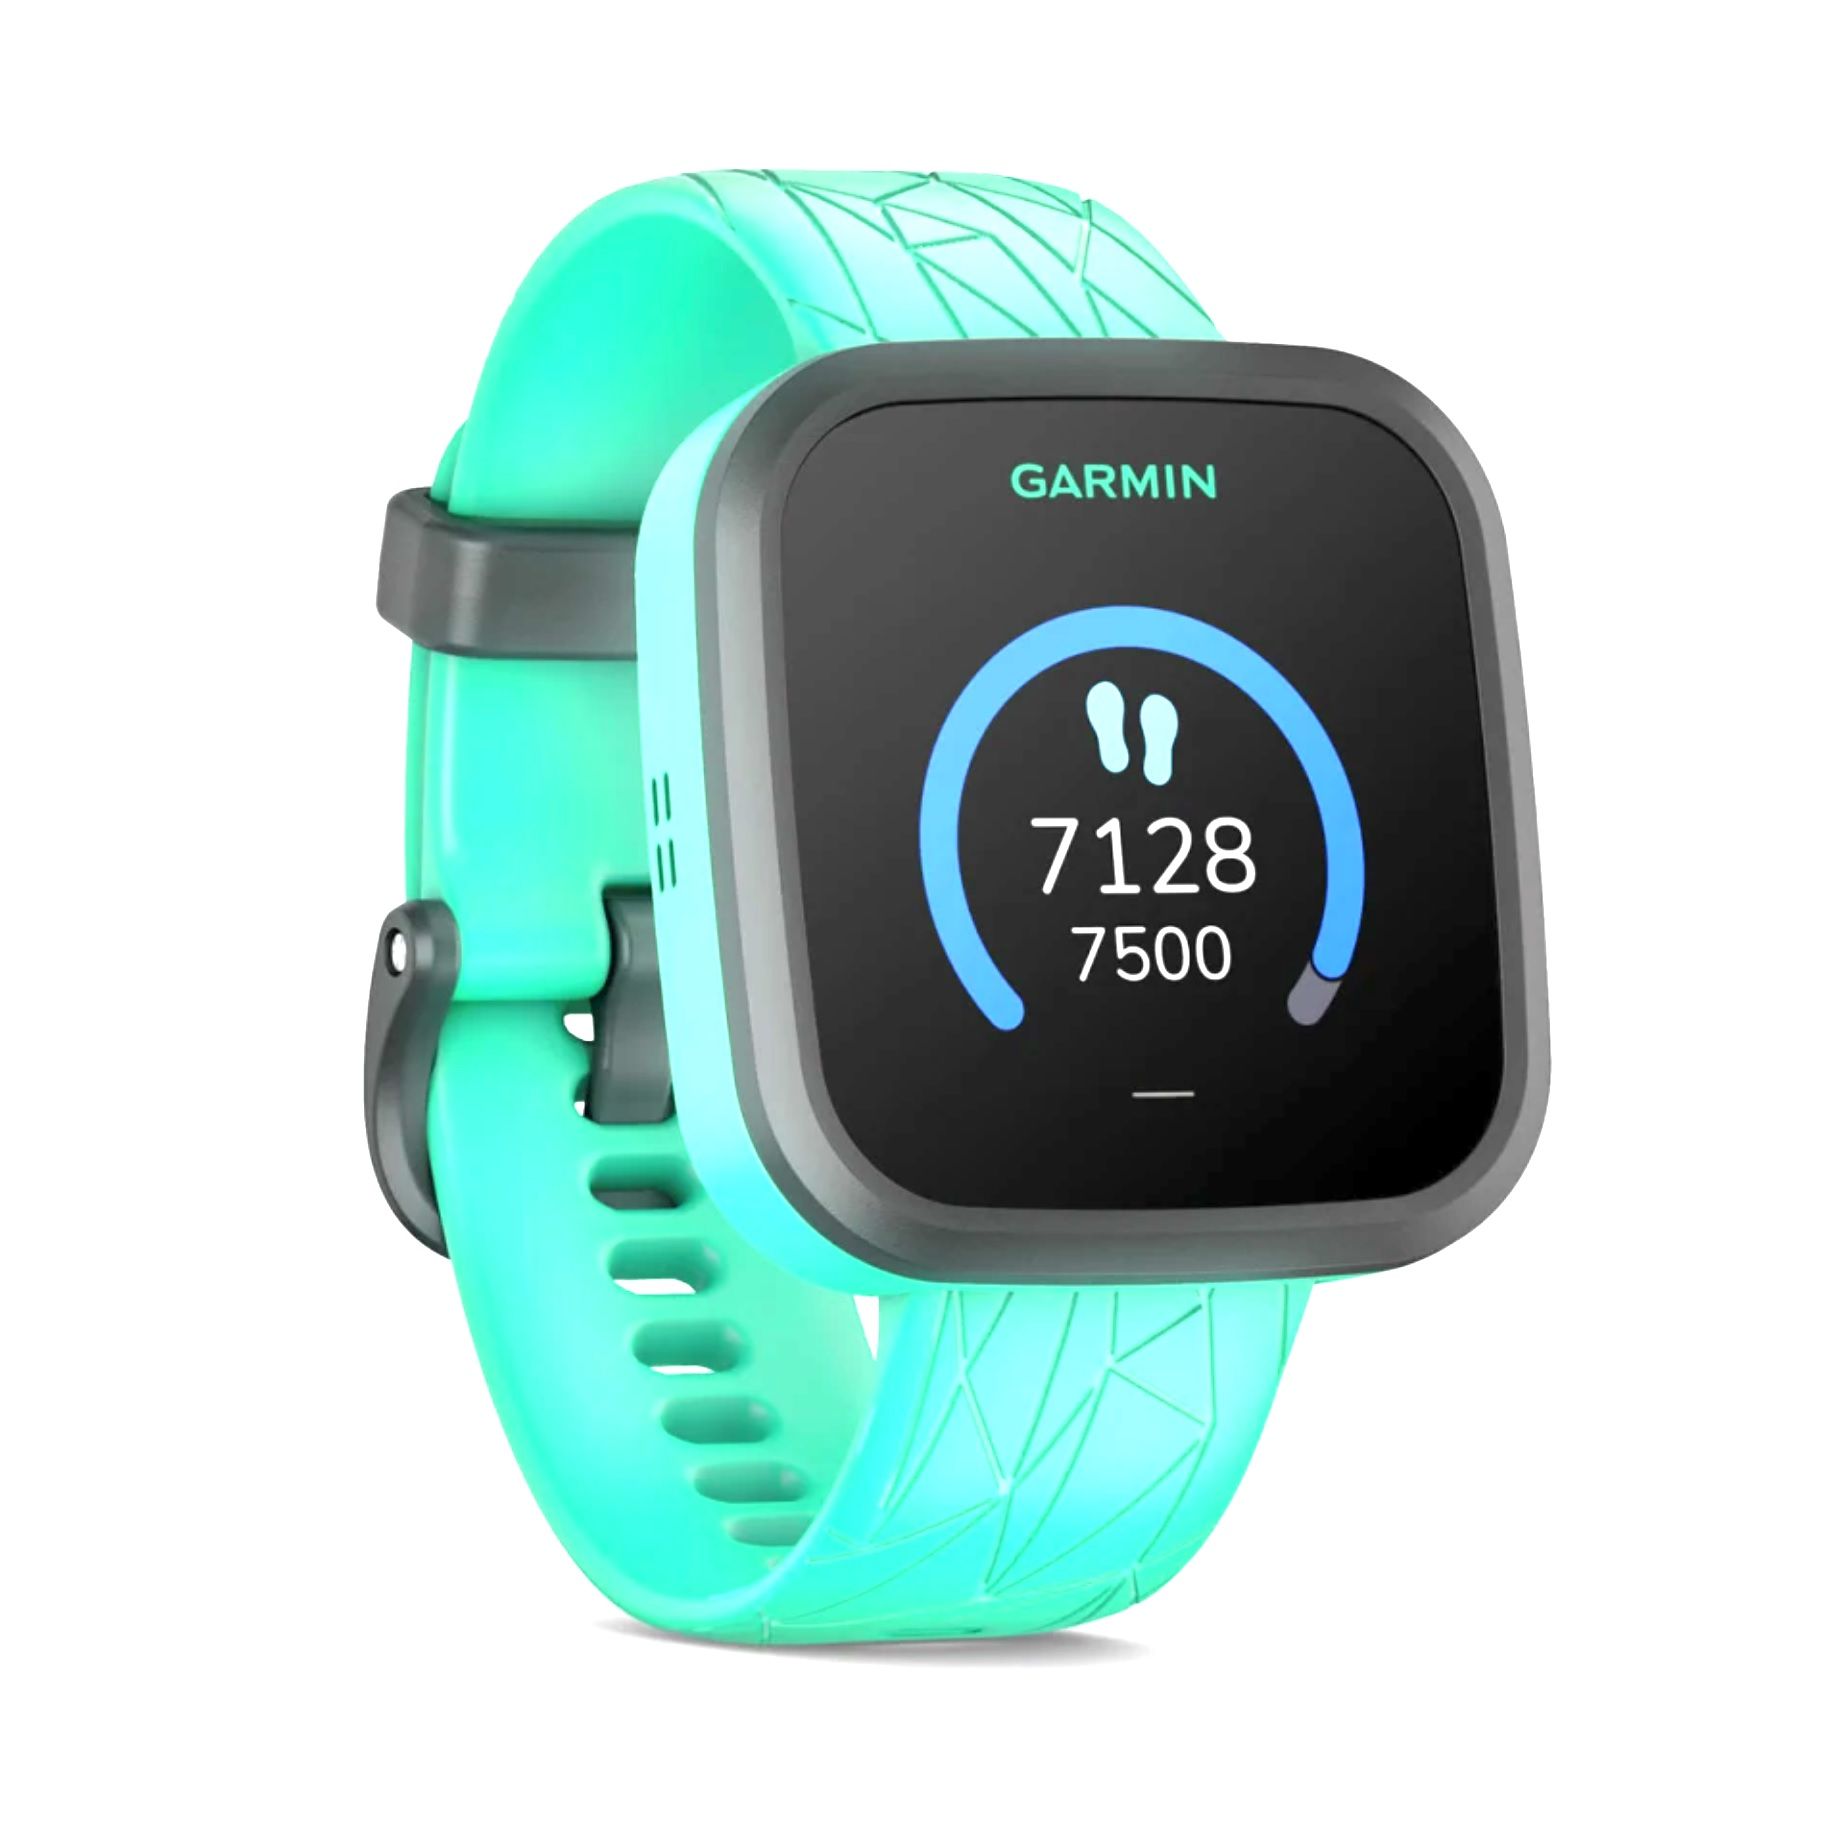 Garmin Bounce smartwatch against a white background